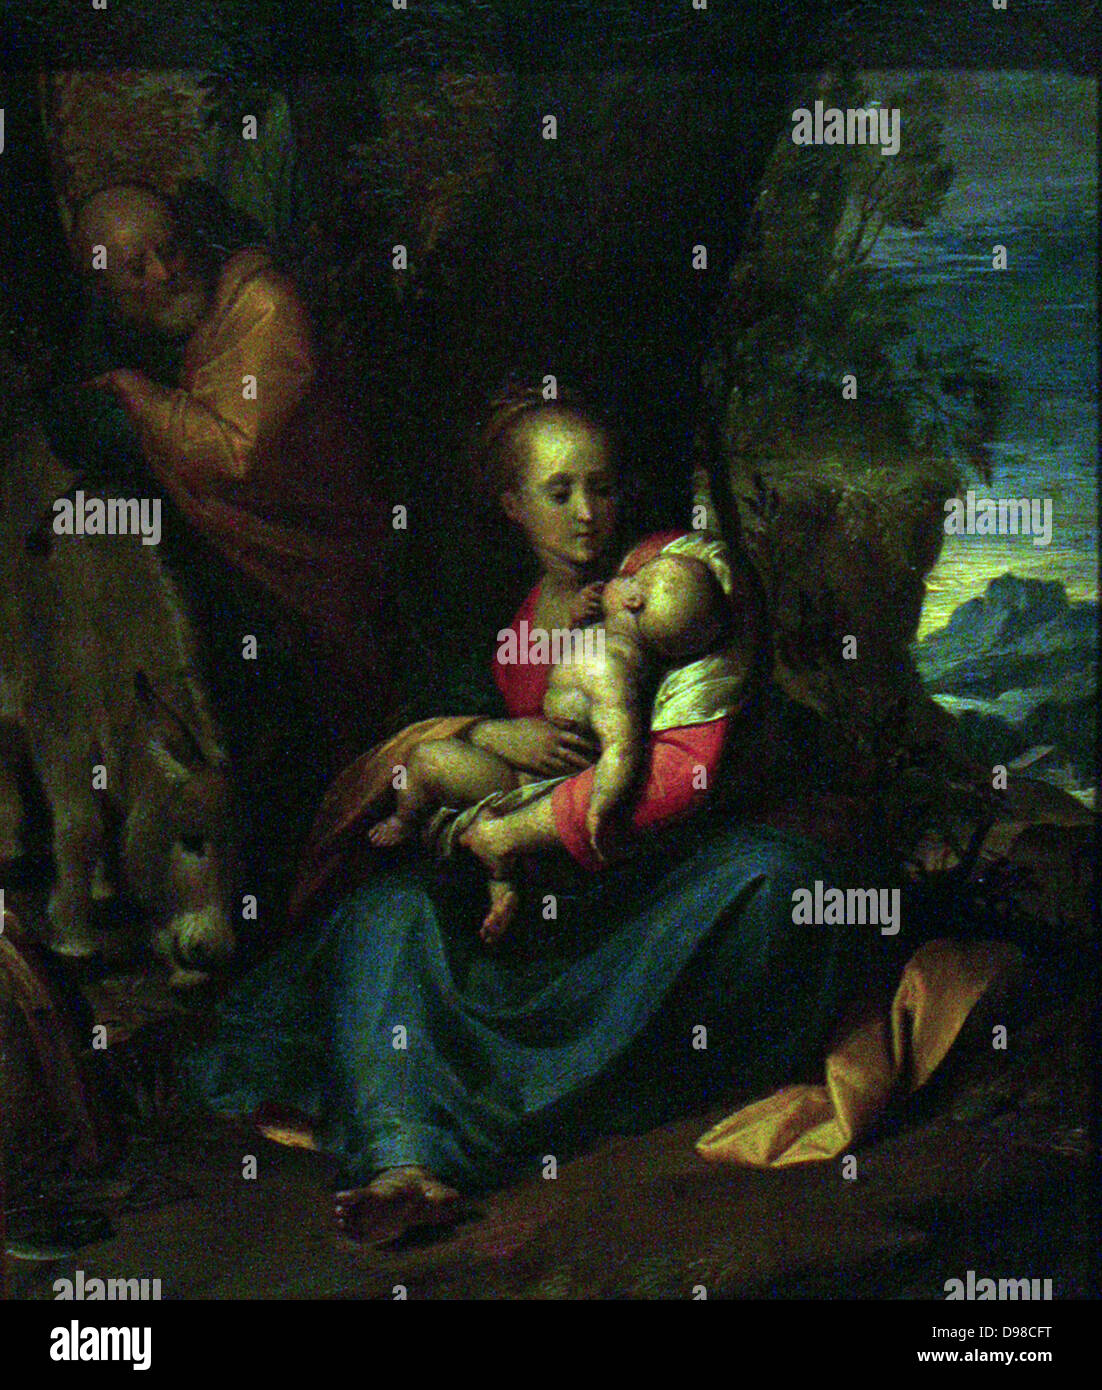 Perhaps by Giovanni Battista Crespi II Cerano (about 1575/76-1632) The Rest on the Flight into Egypt, oil on copper.  In a colourful landscape setting, Mary nurses the child Jesus.  The Holy Family fled to Egypt to escape Herod's command that all new-born boys should be killed.  Painted on copper around 1600. Stock Photo